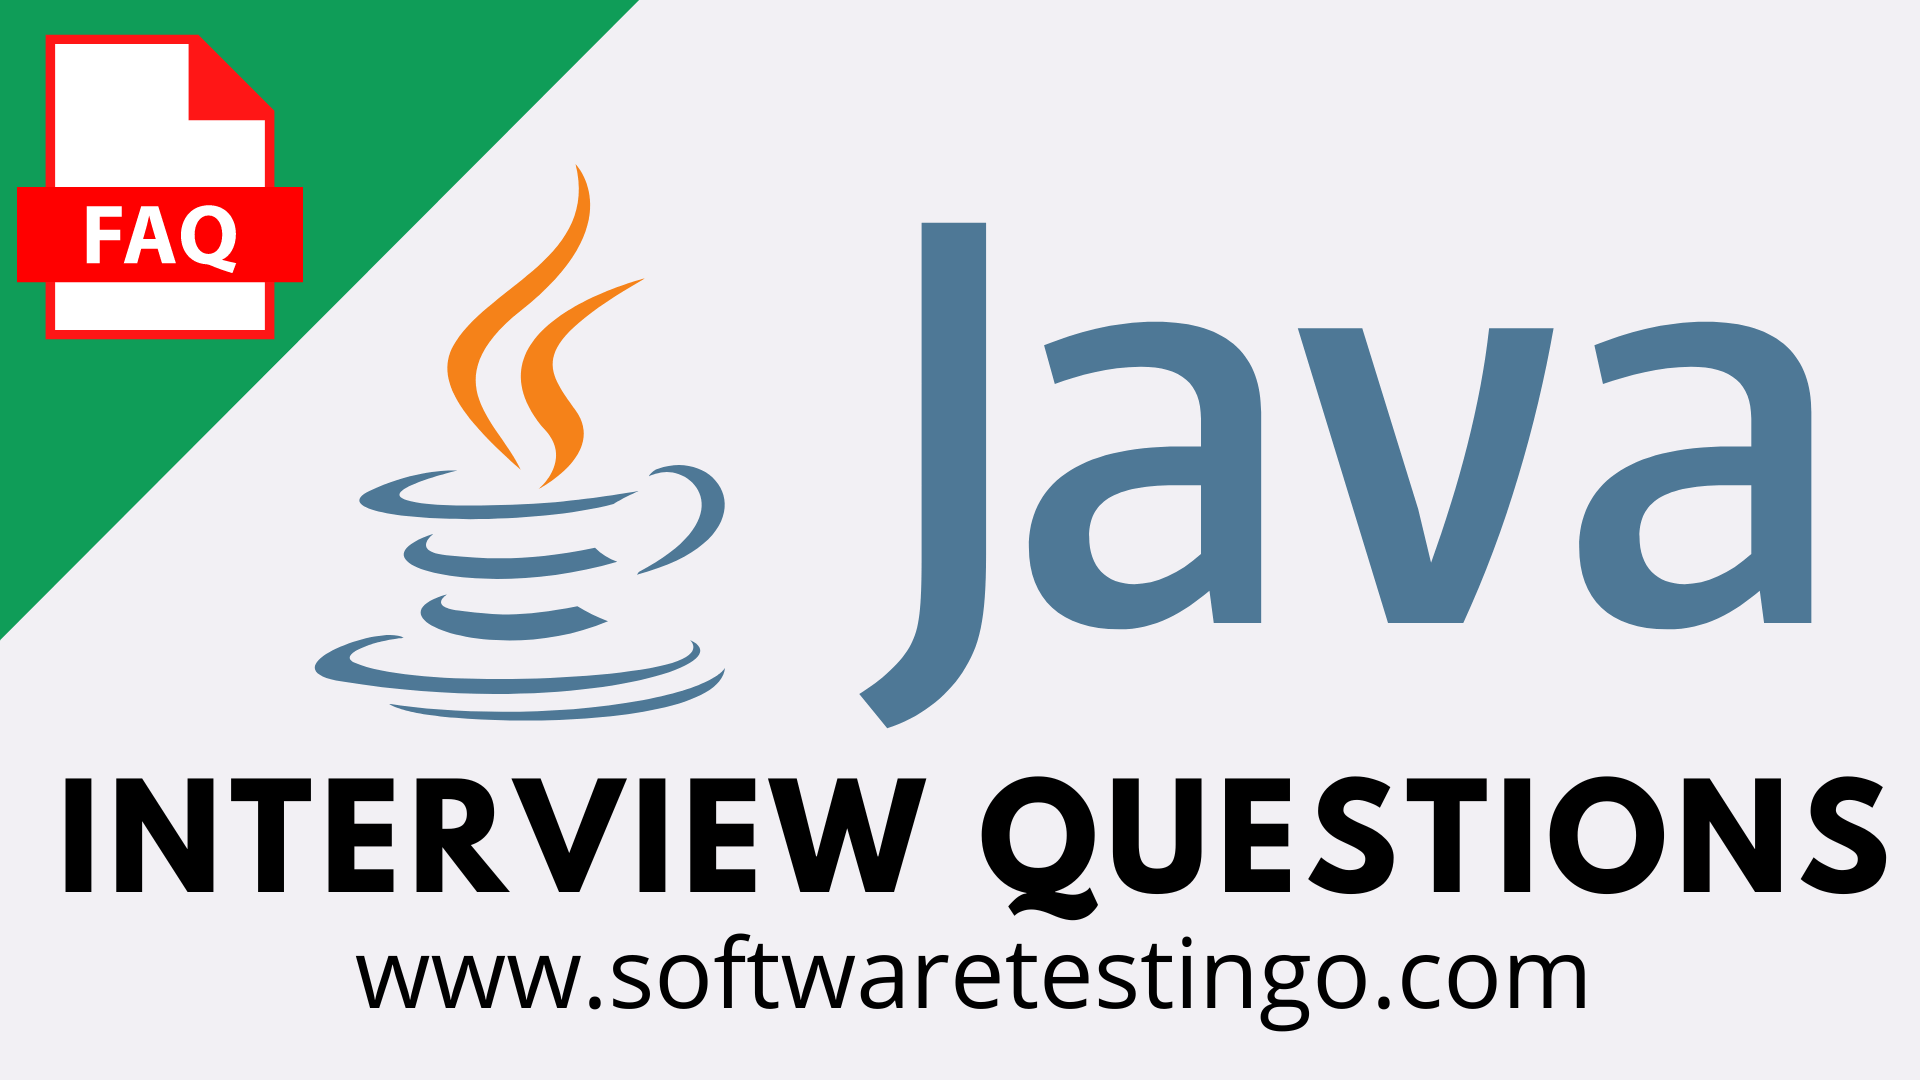 Core Java Interview Questions